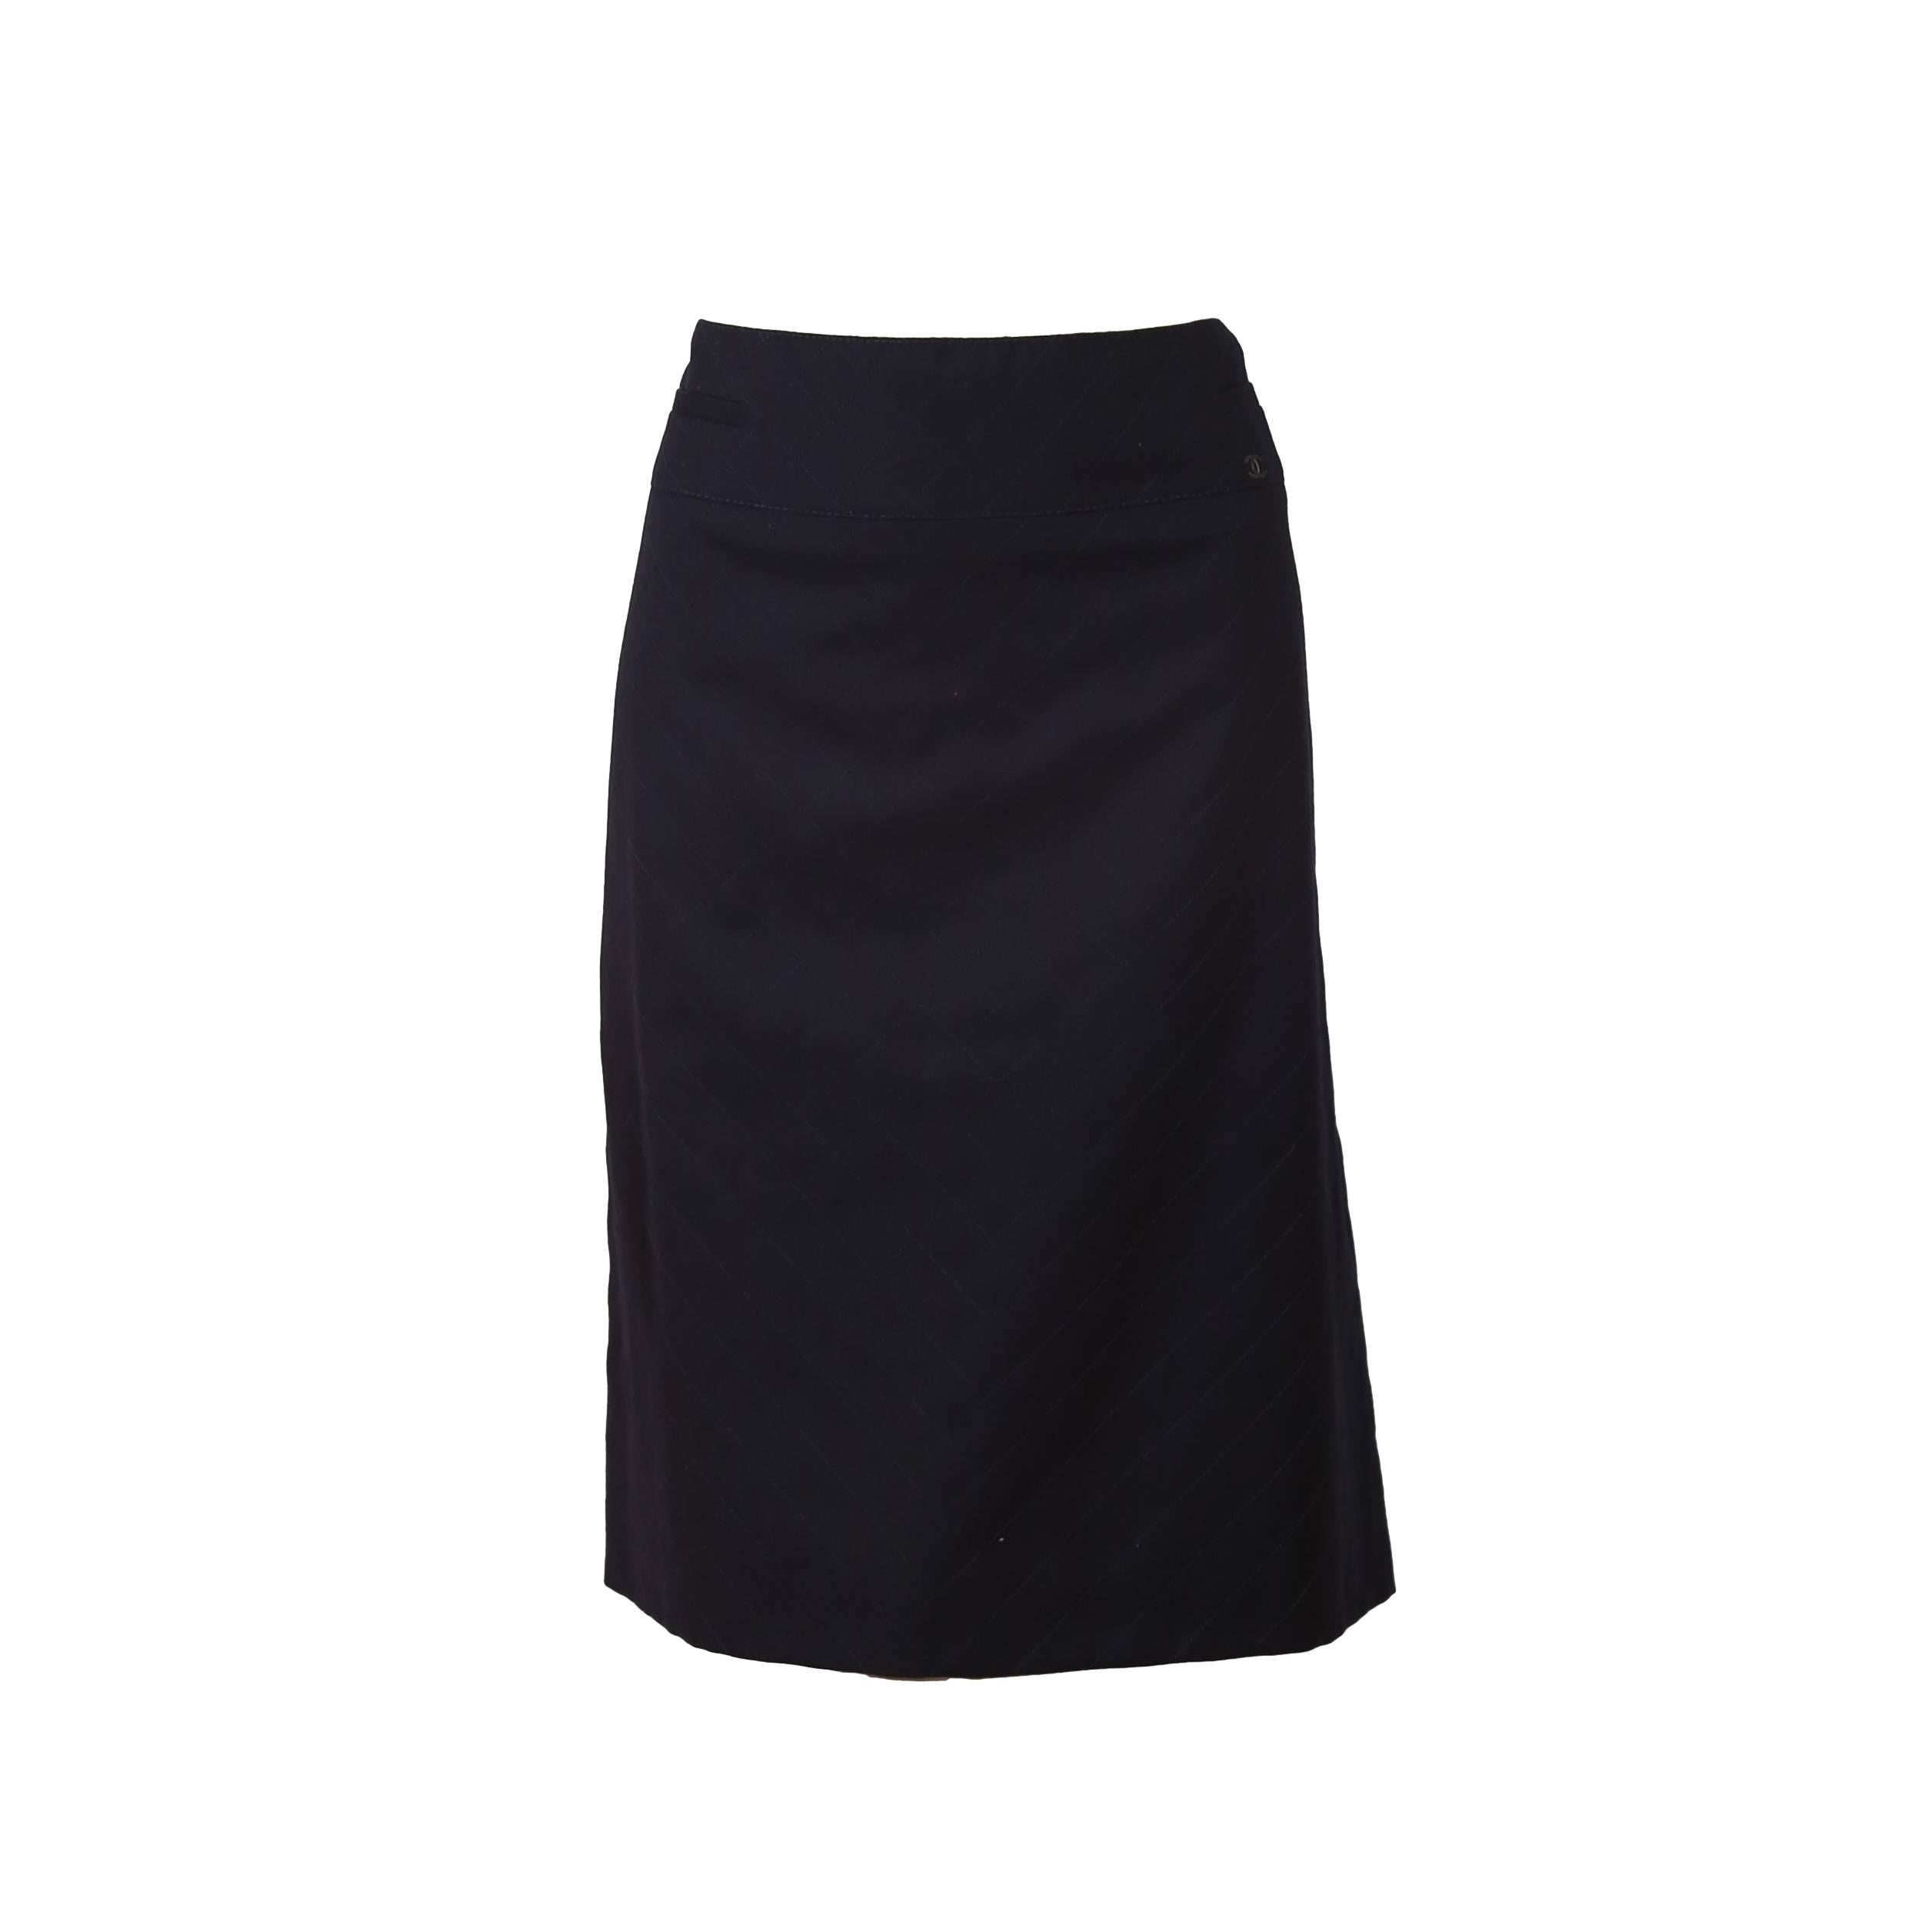 Chanel Black Wool and Cashmere Blend Skirt